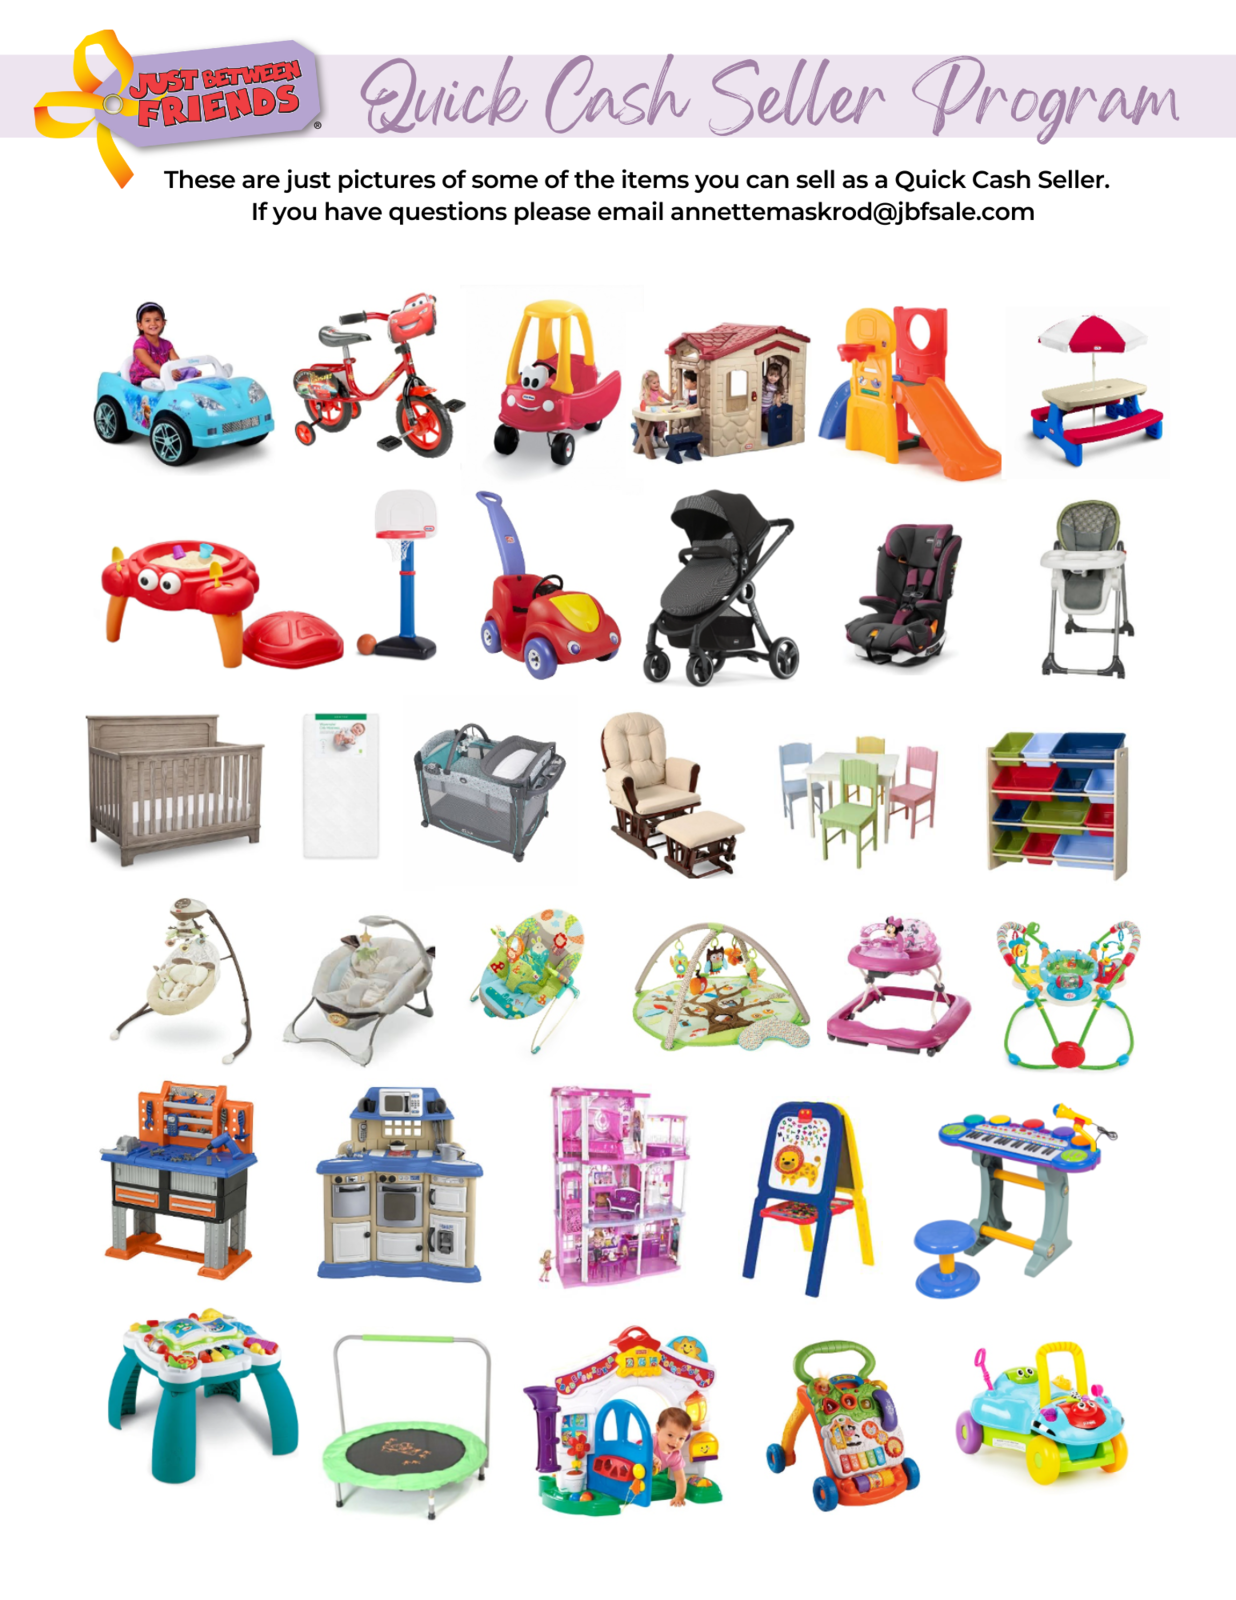 Items that qualify for quick cash: any large items, toys, furniture, or baby equipment.  You will be paid 25% of the Amazon retail value of the item.  You can be paid by eCheck within 24 hours of drop off OR with JBF bucks that you can spend at the sale.  All quick cash participants also get a presale pass and a 50% off presale pass.